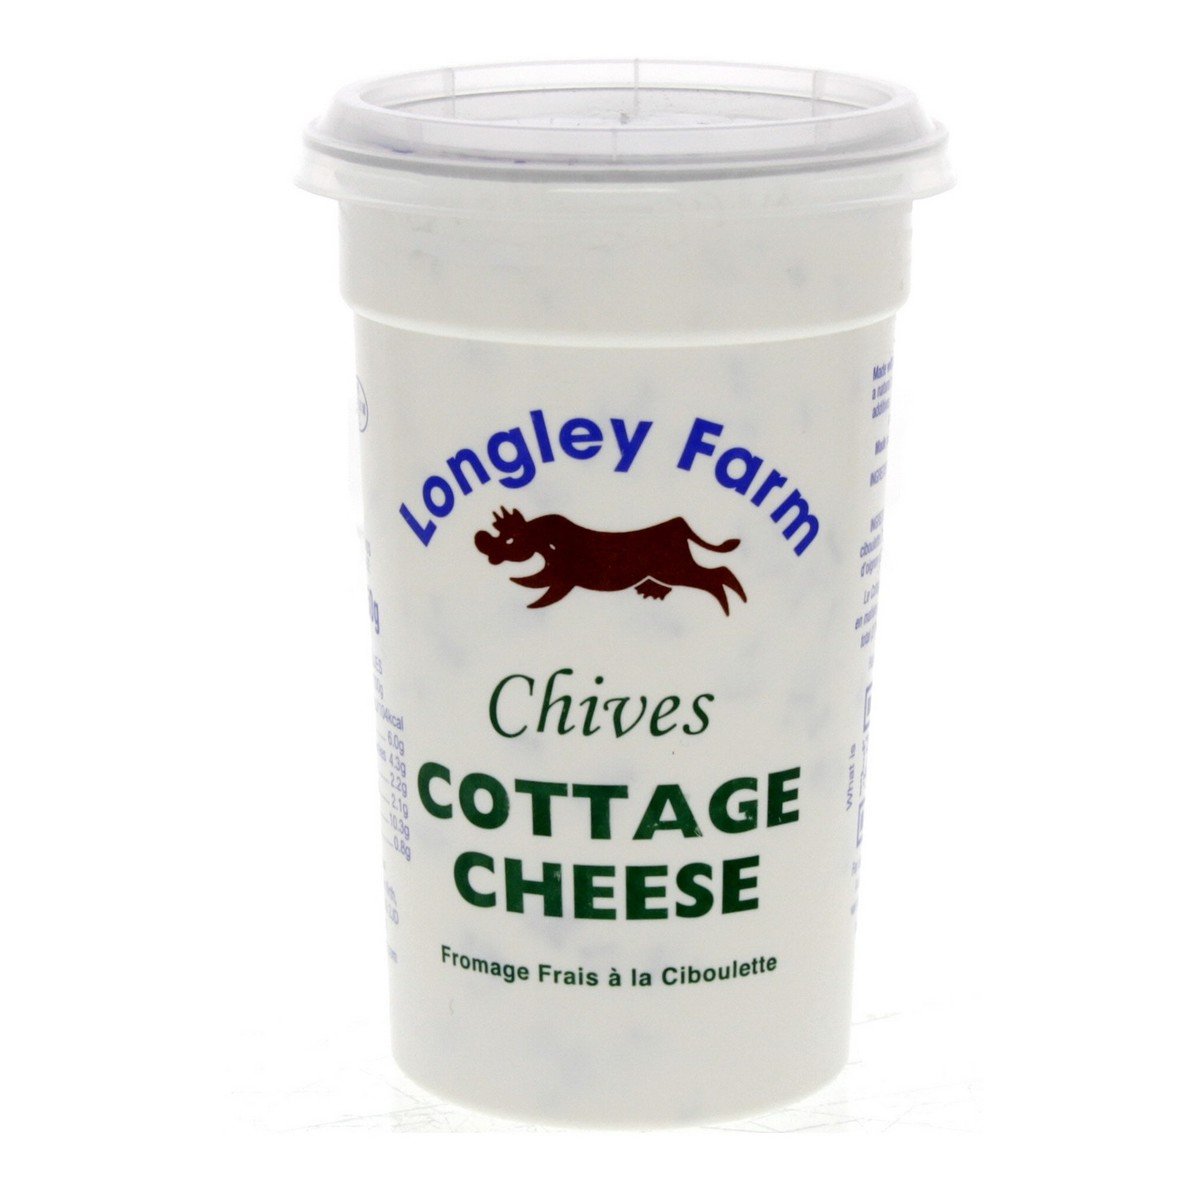 Longley Farm Chives Cottage Cheese 250 g